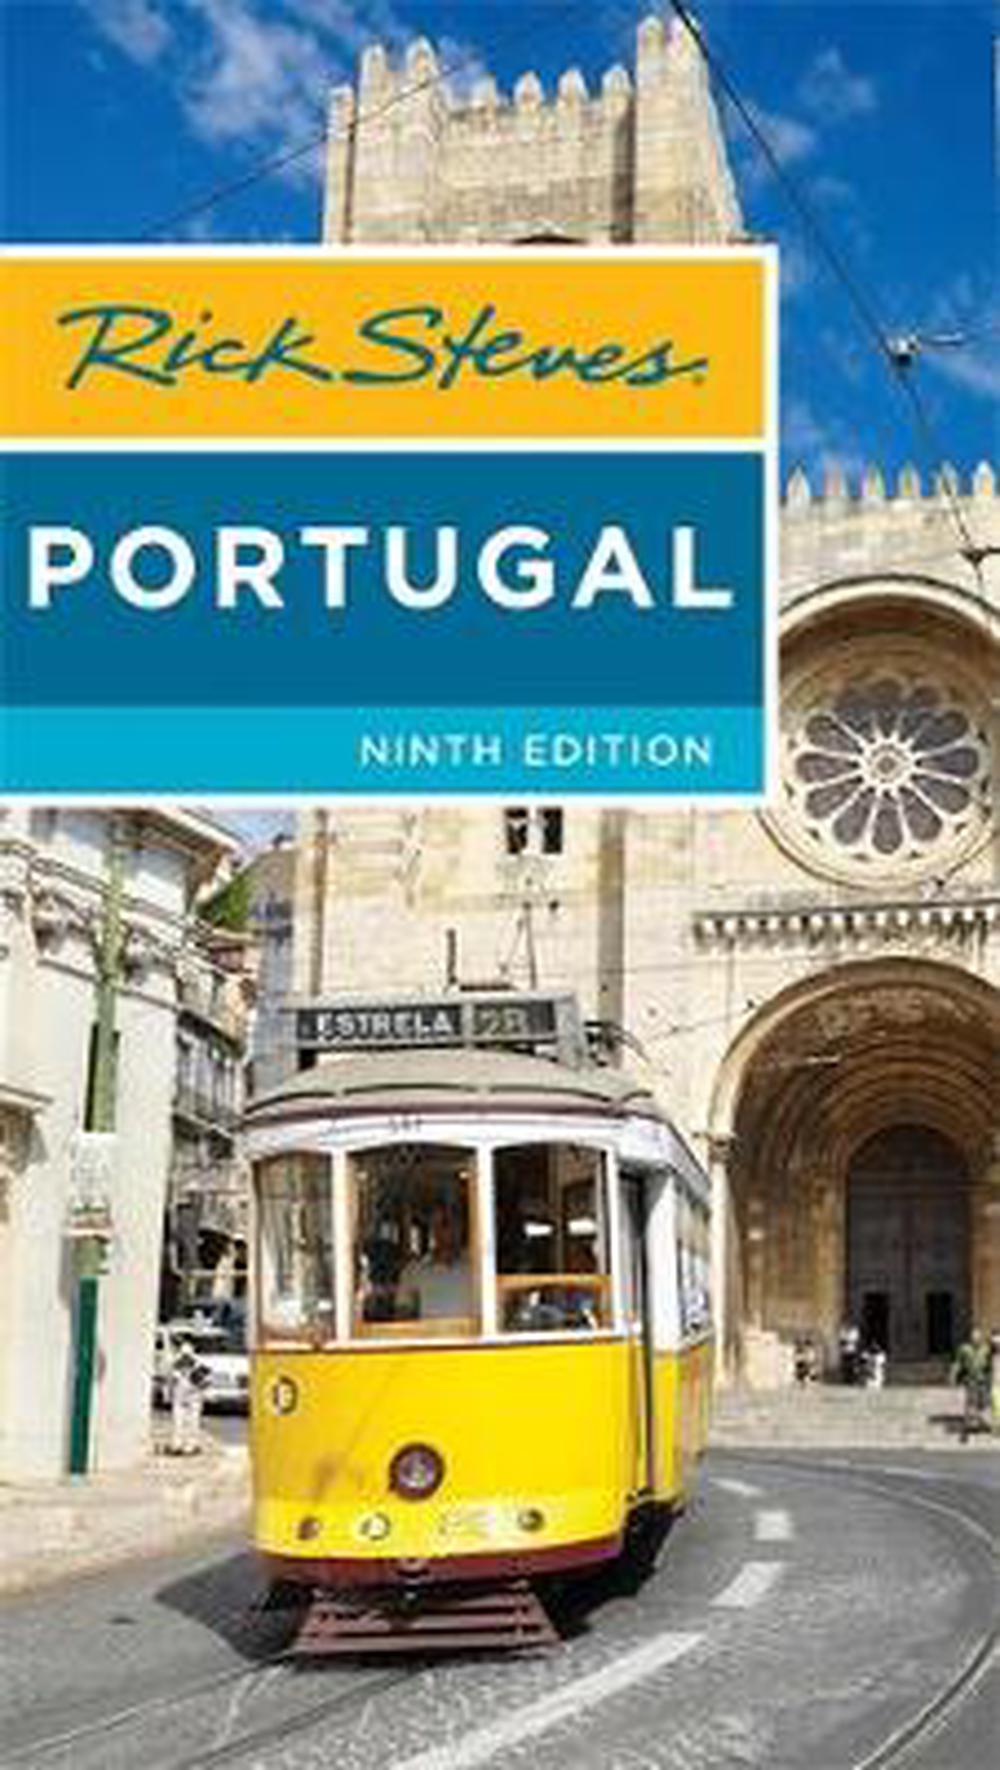 Rick Steves Portugal, 9th Edition by Rick Steves Paperback Book Free